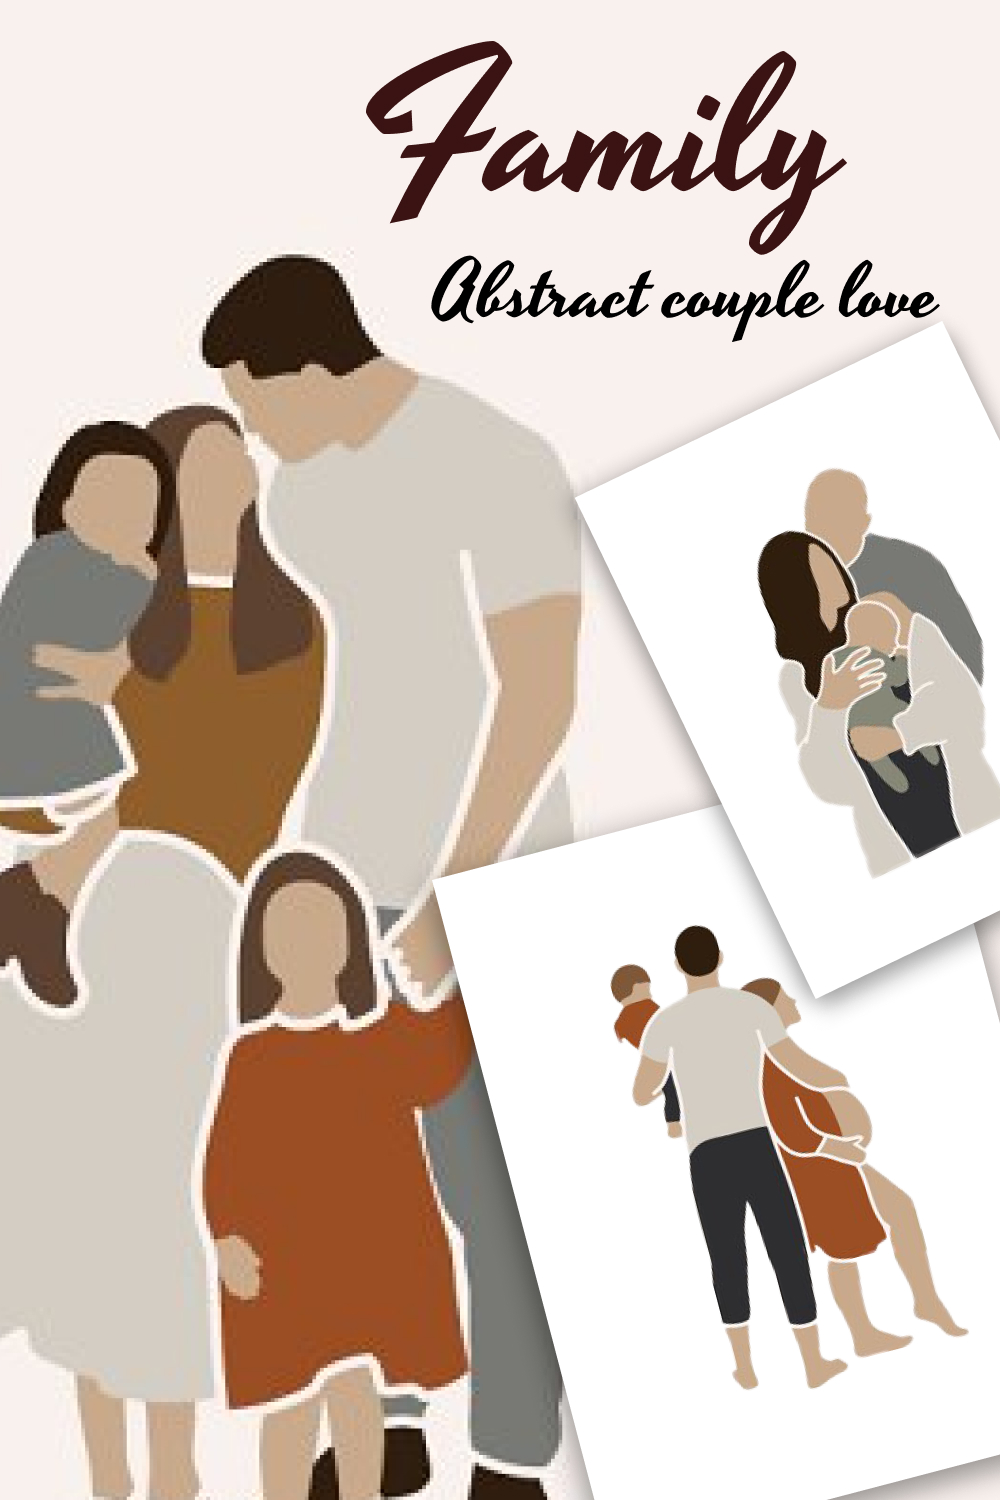 family clipart abstract couple love pinterest 807